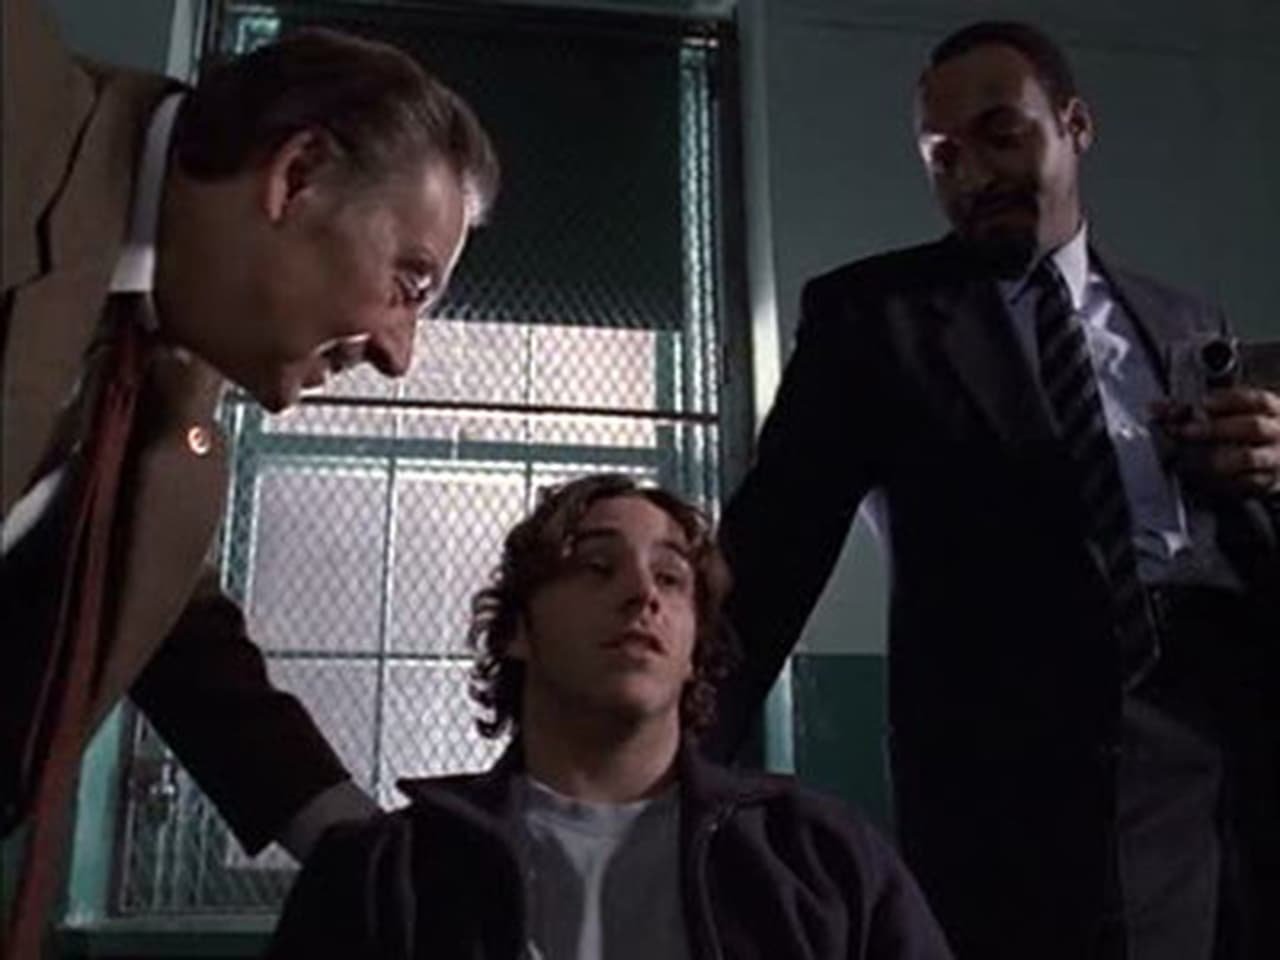 Law & Order - Season 11 Episode 15 : Swept Away - A Very Special Episode